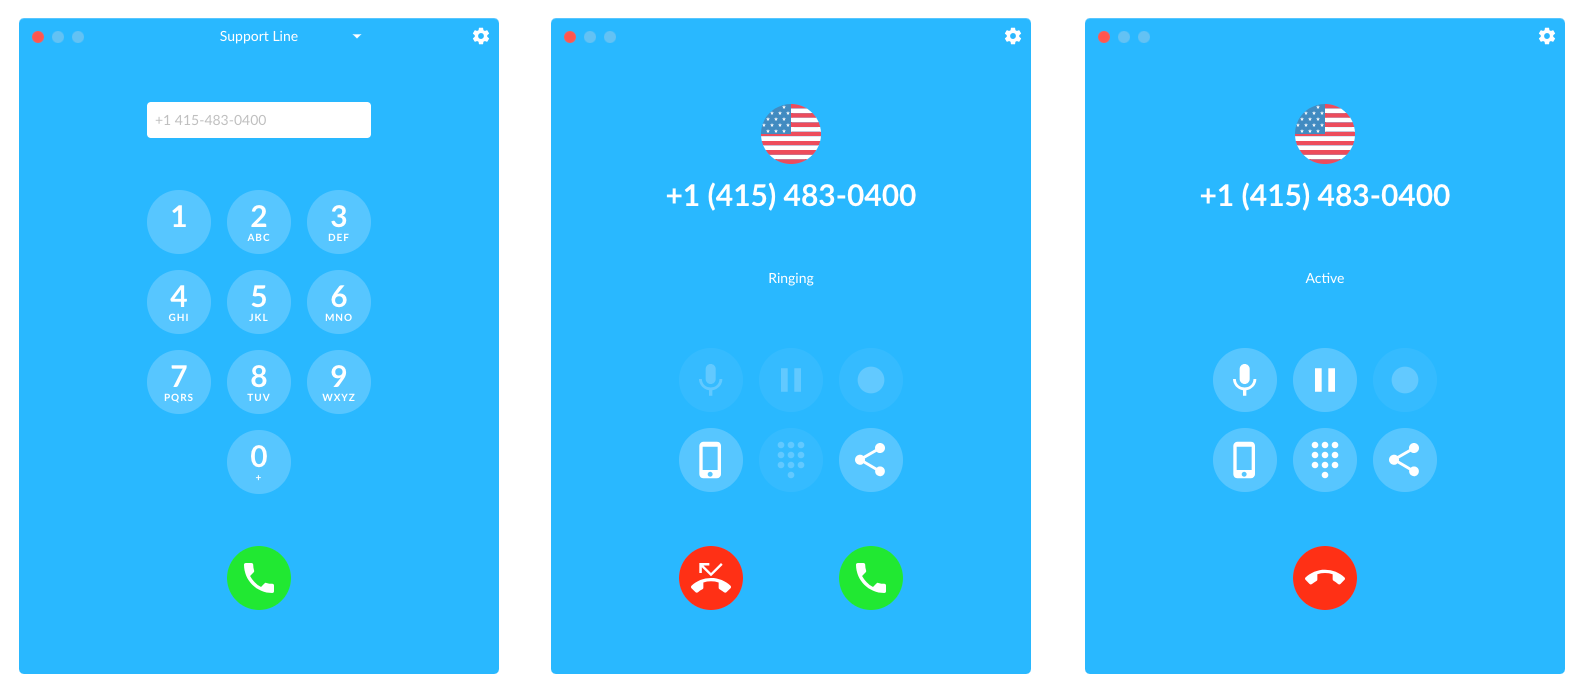 The screenshots show different states of the app. The first one is for making an outbound call, the second is showing an incoming call which you can answer or mute (so others in your team can still pick up) and the third one is an active outbound call.